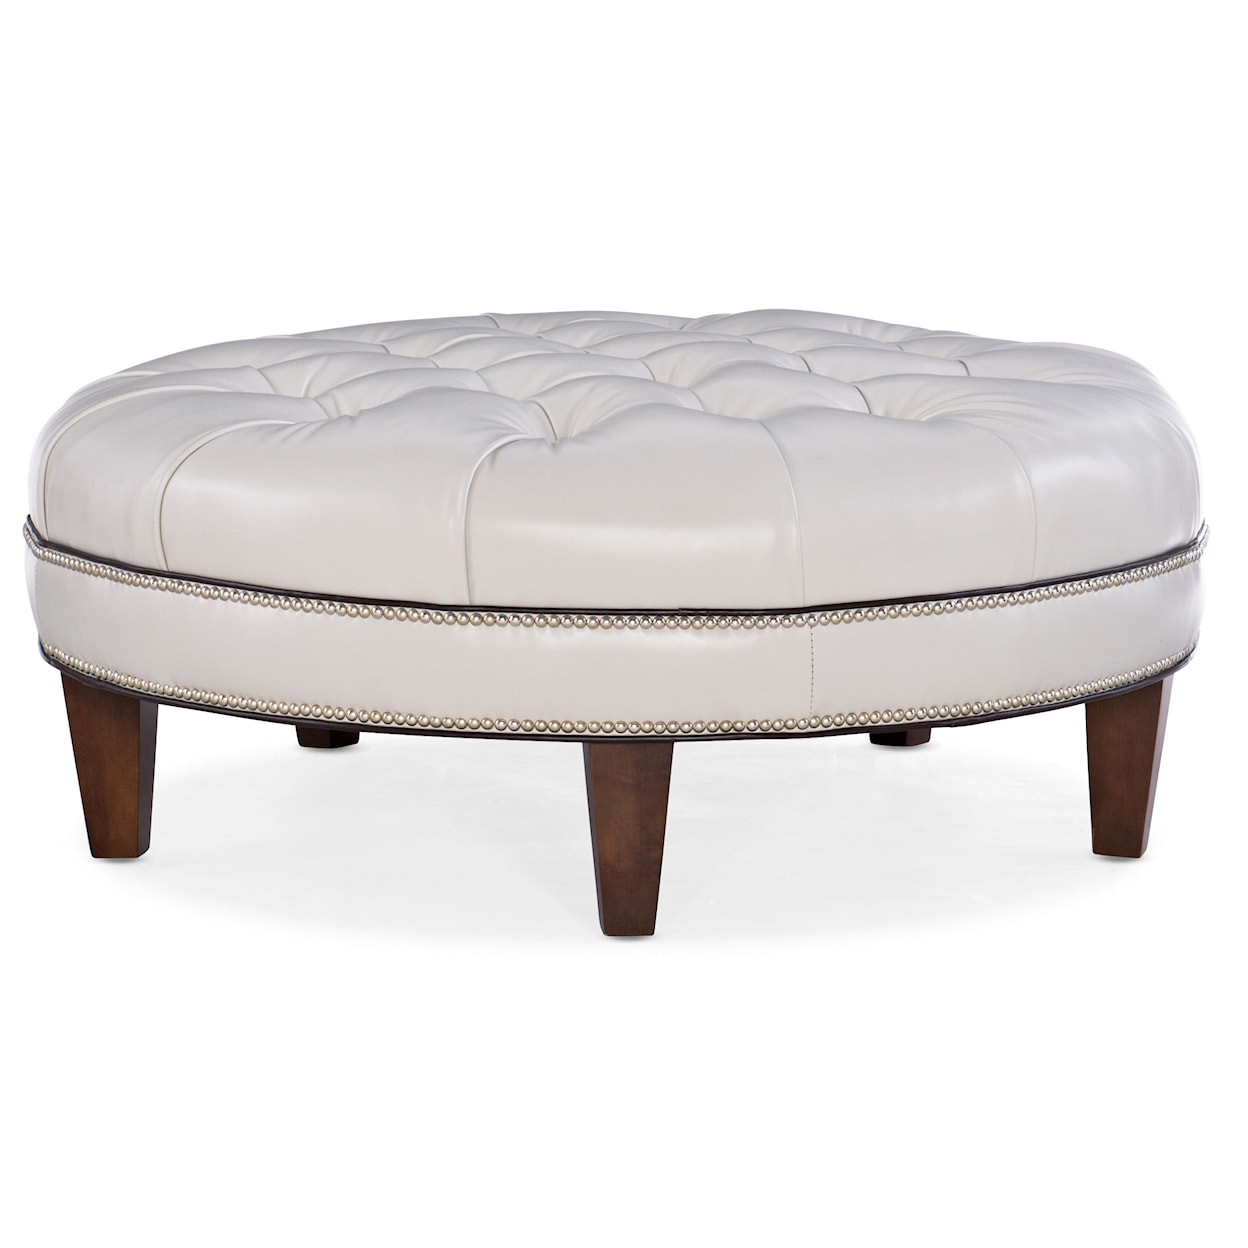 Bradington Young Well-Rounded XL Tufted Round Ottoman